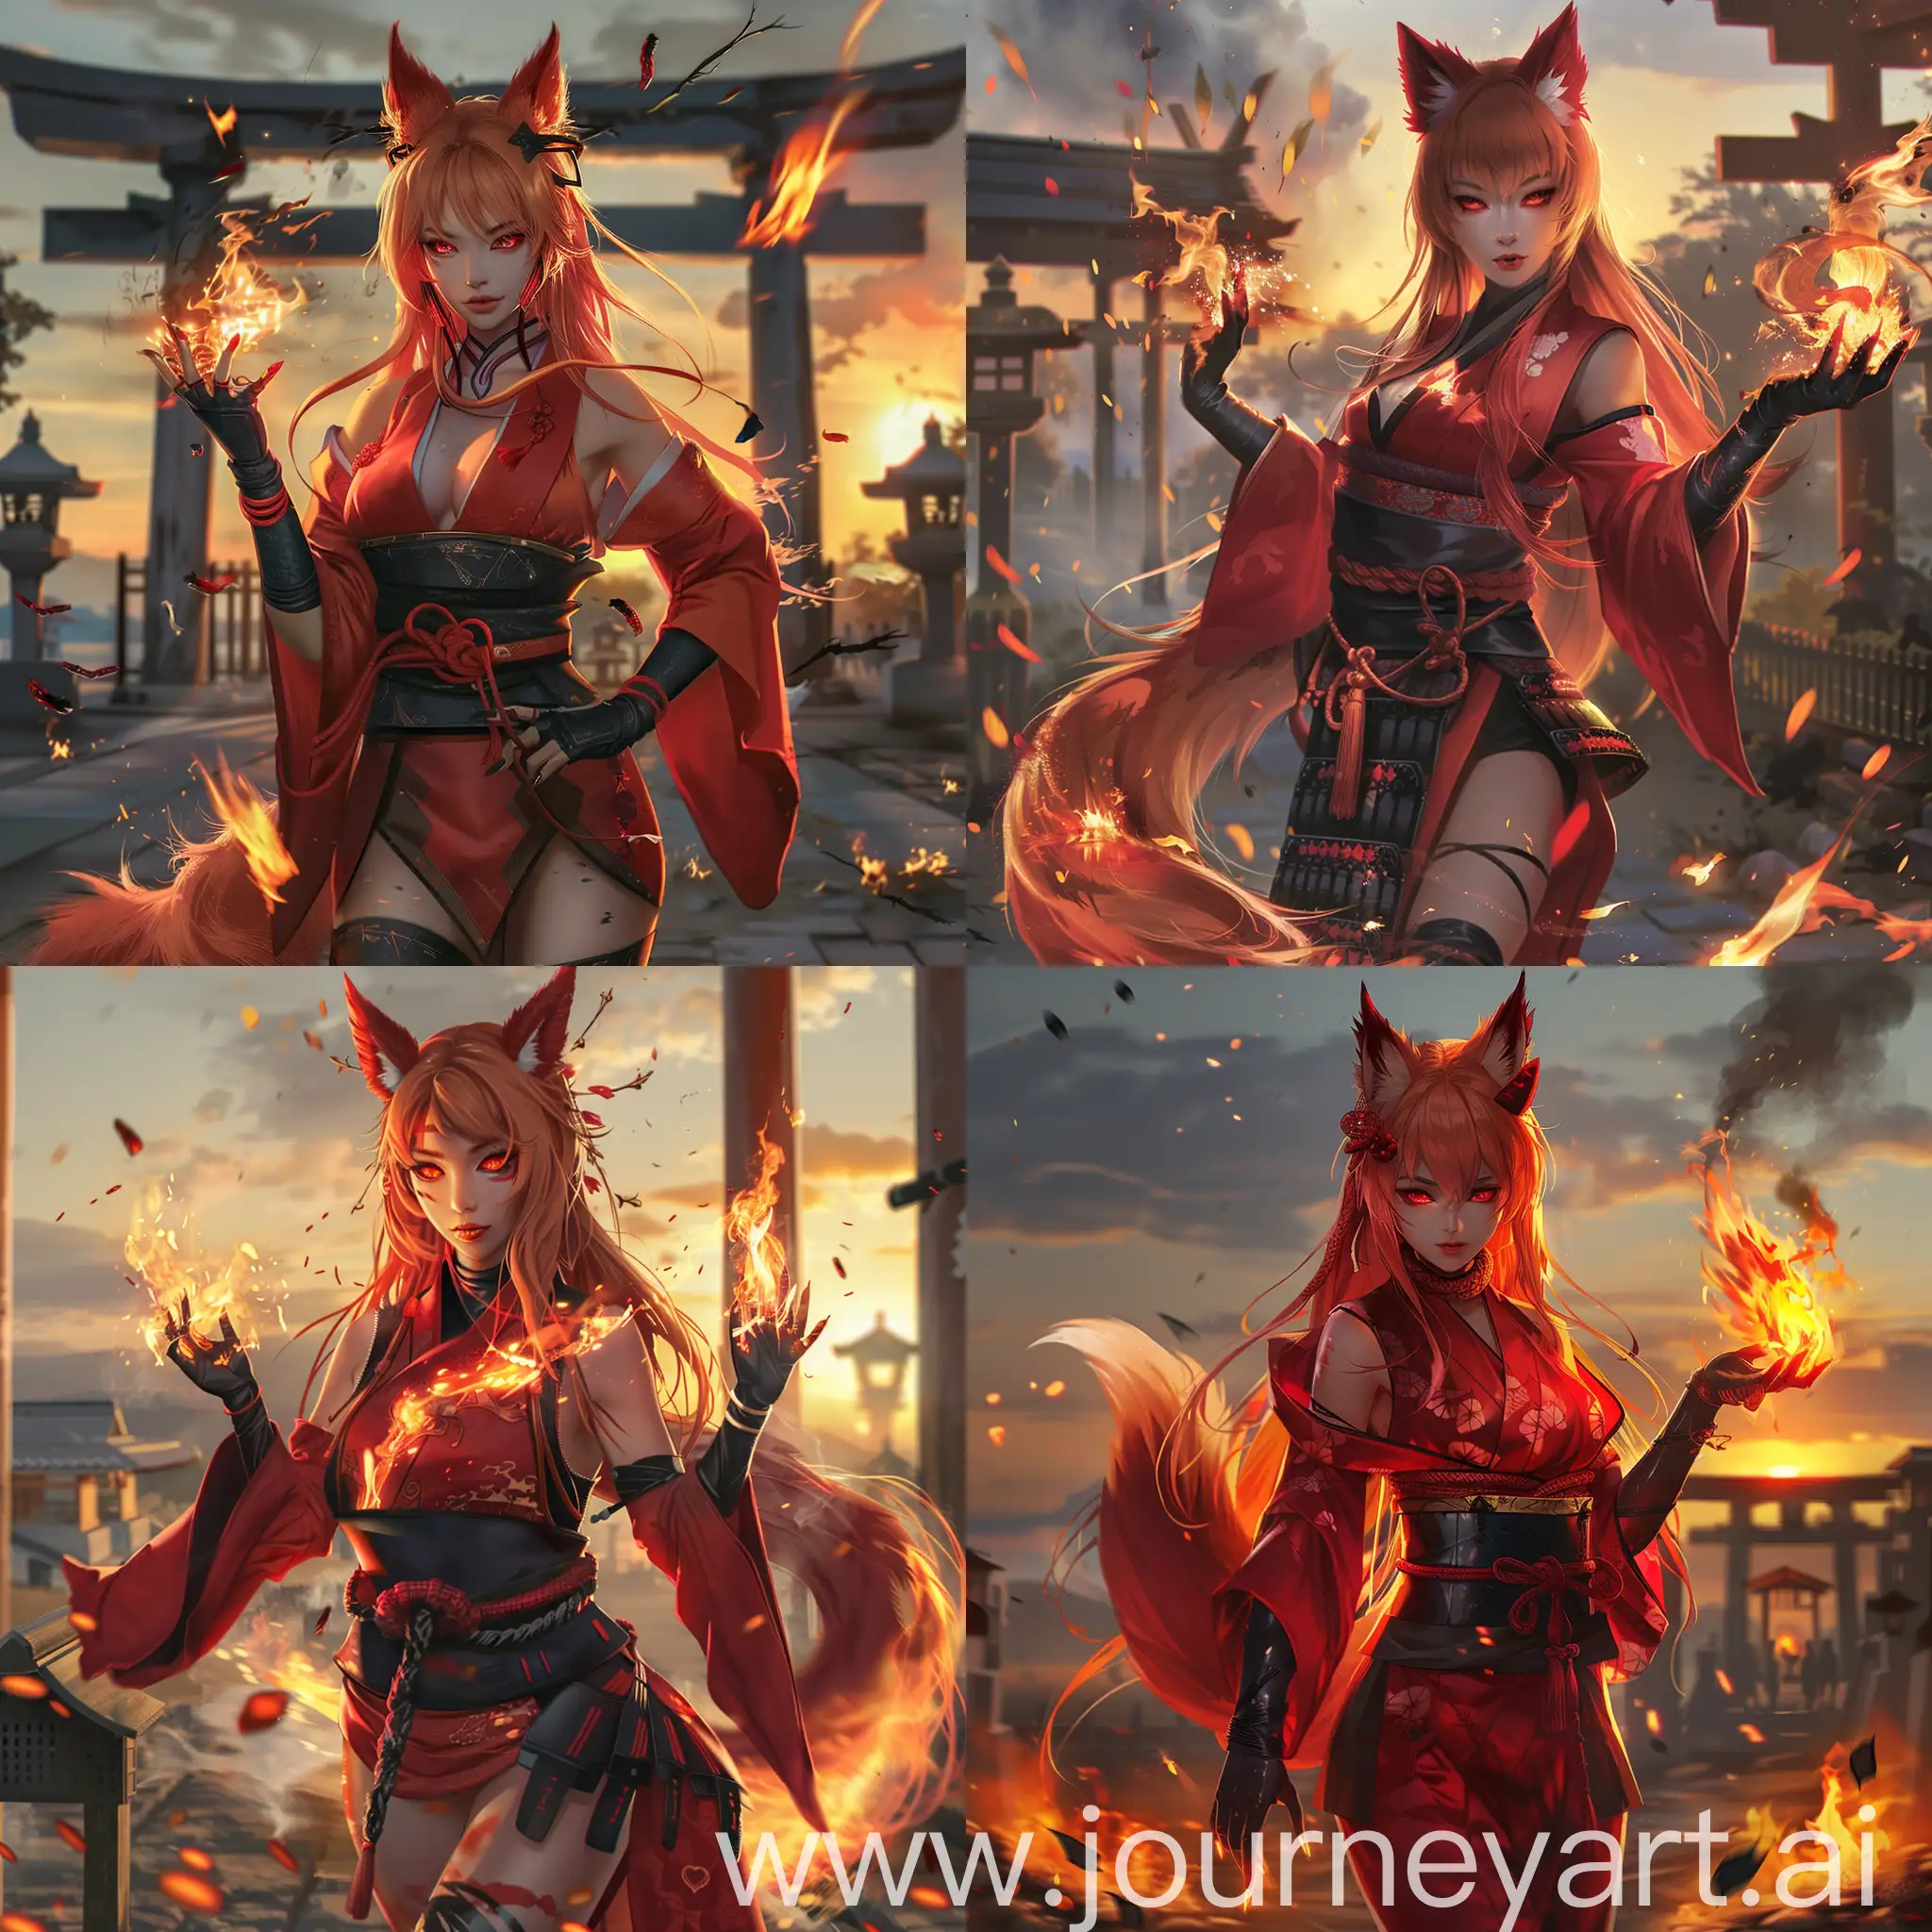 Fiery-Red-FoxWoman-Casting-Spell-at-Shinto-Shrine-during-Sunset